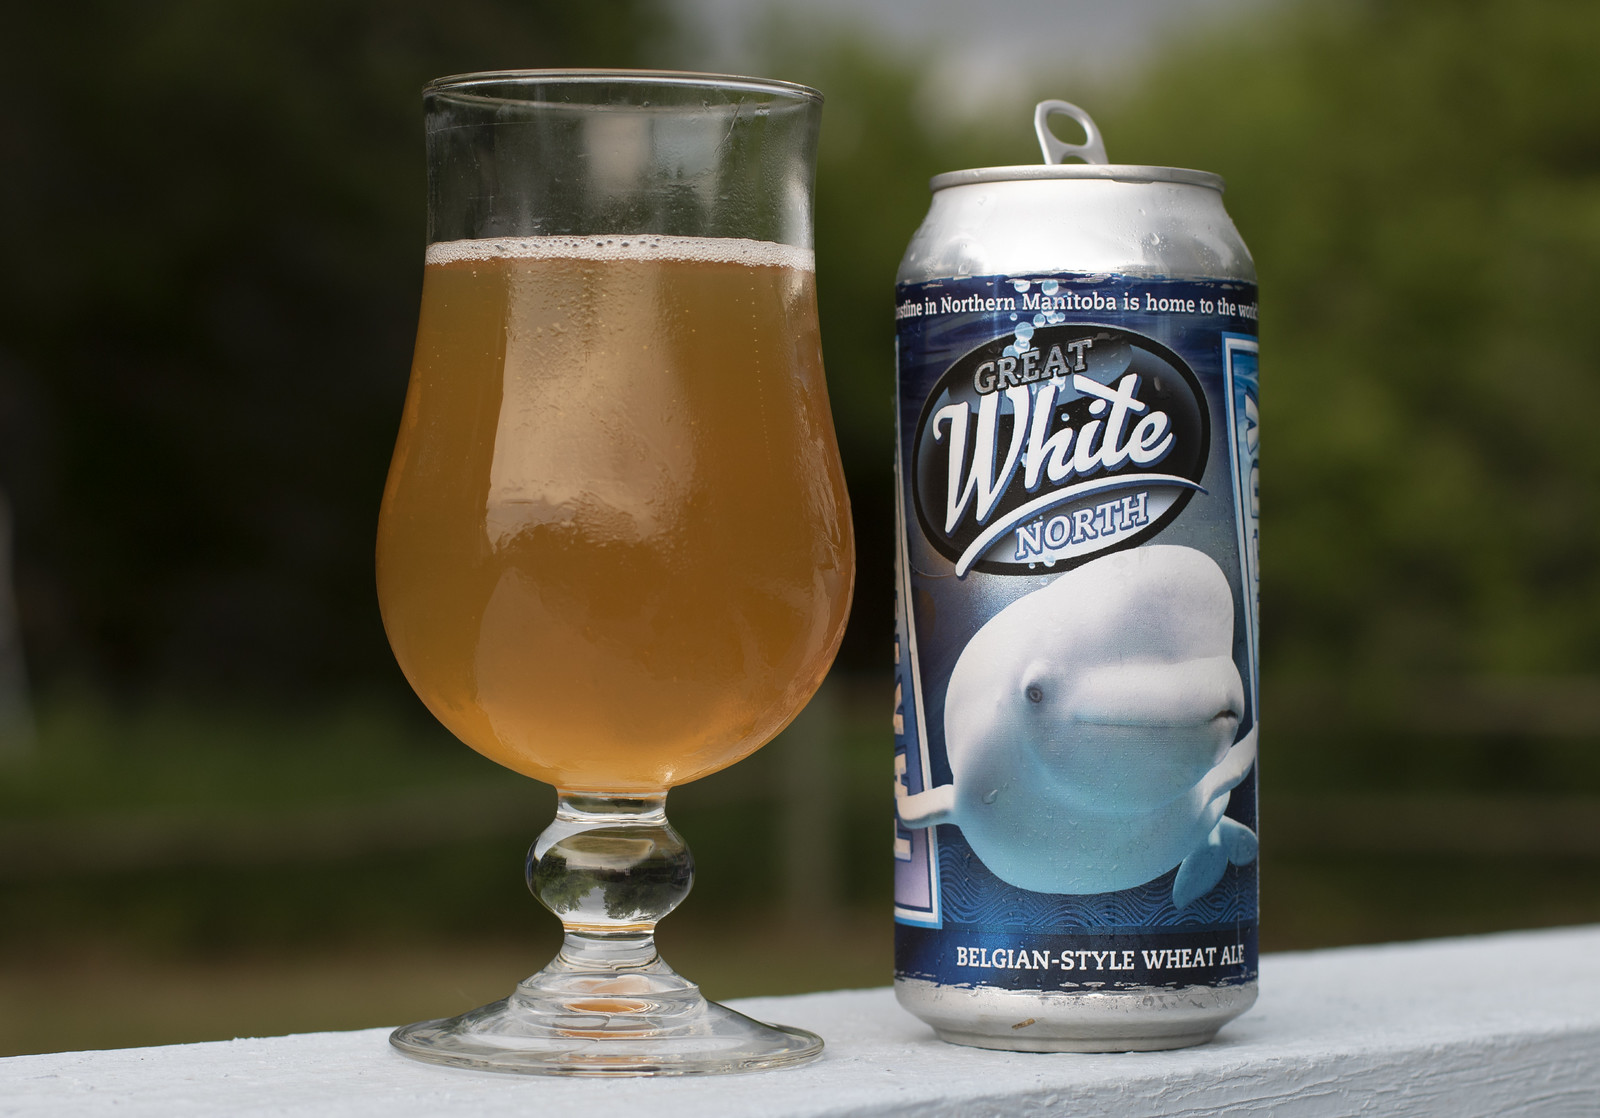 Farmery Great White North Belgian-style Wheat Ale